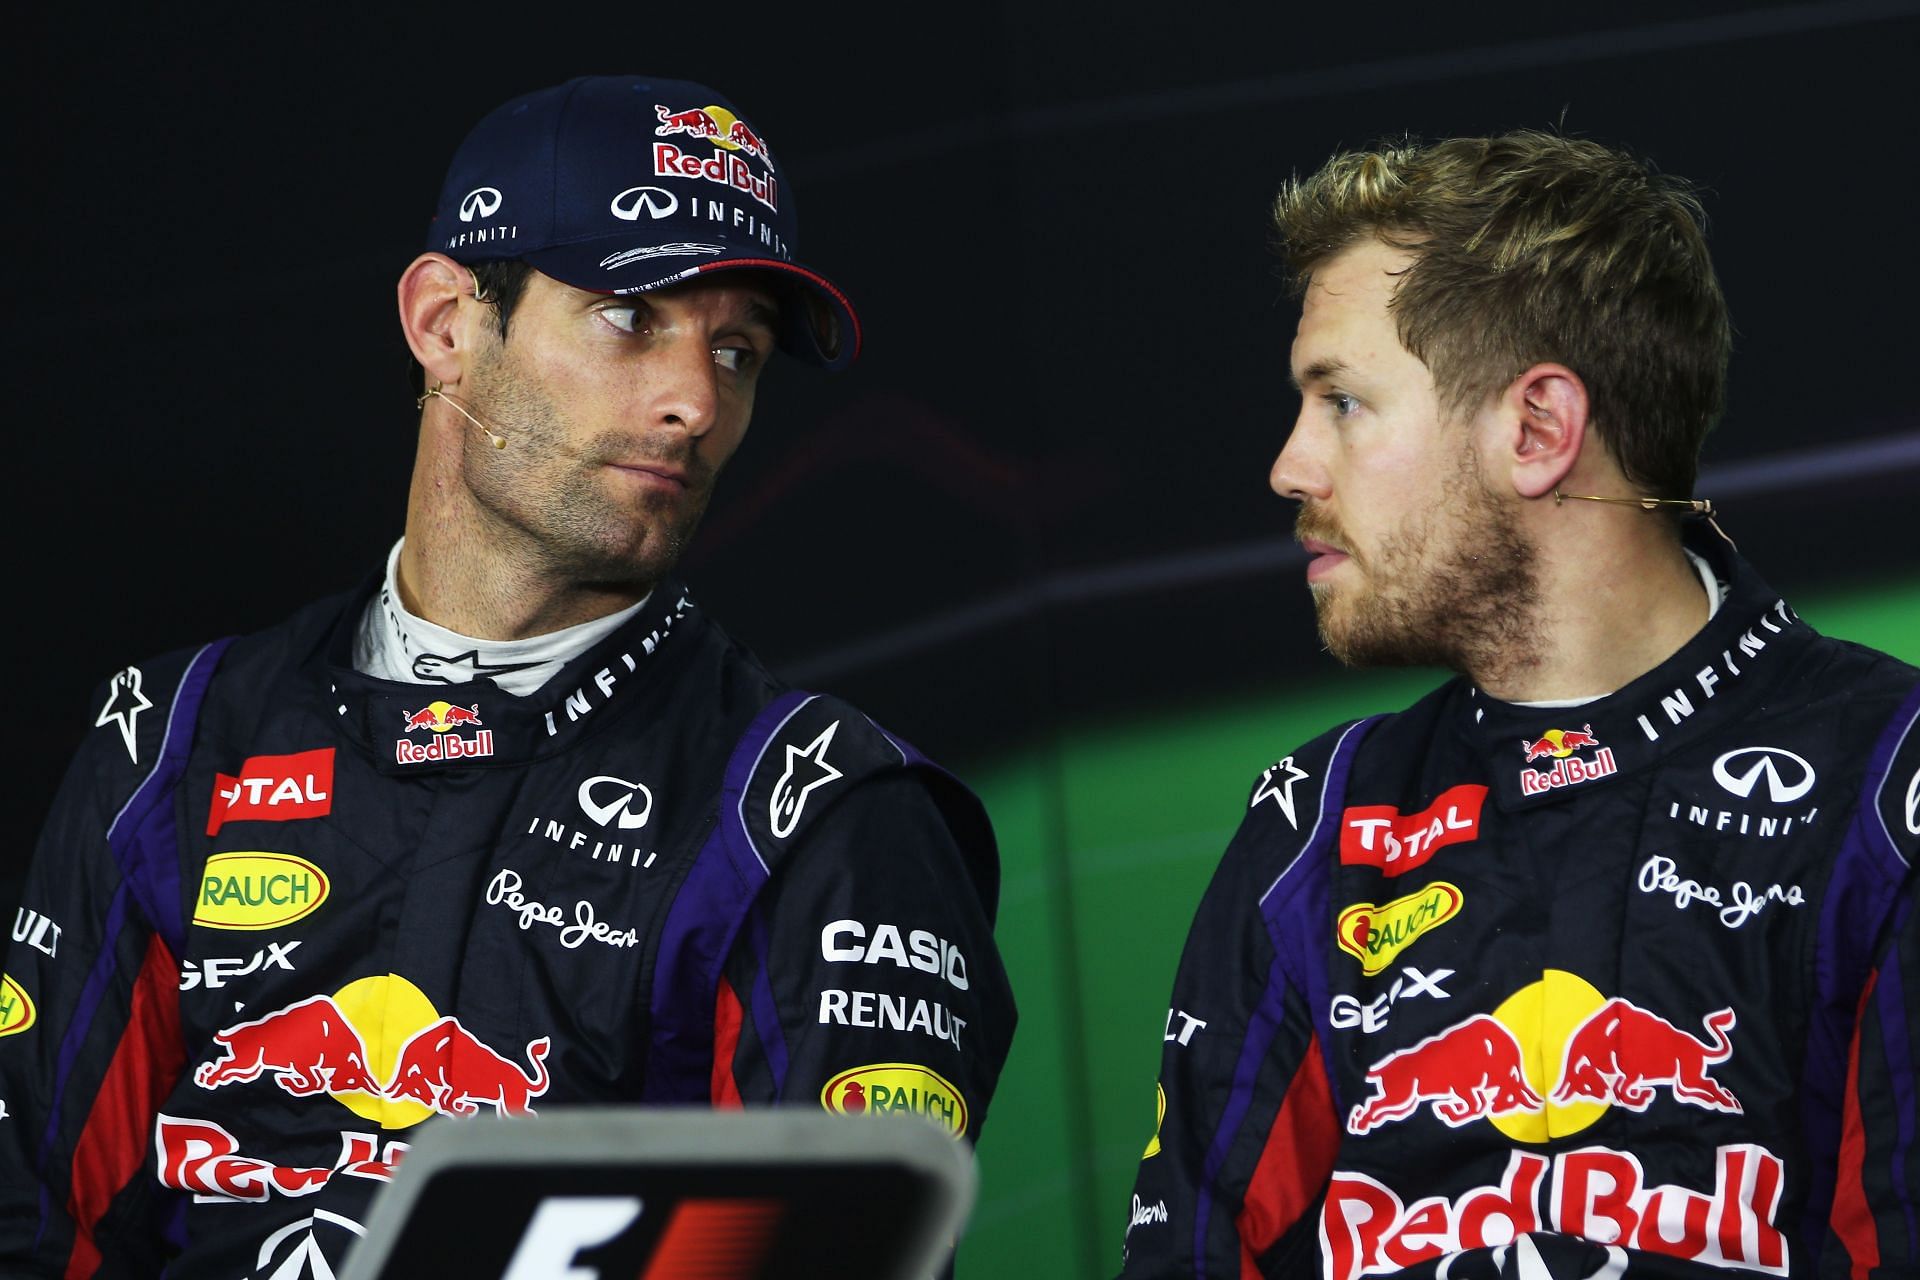 Webber and Vettel did not have the easiest relationship when they were teammates at Red Bull